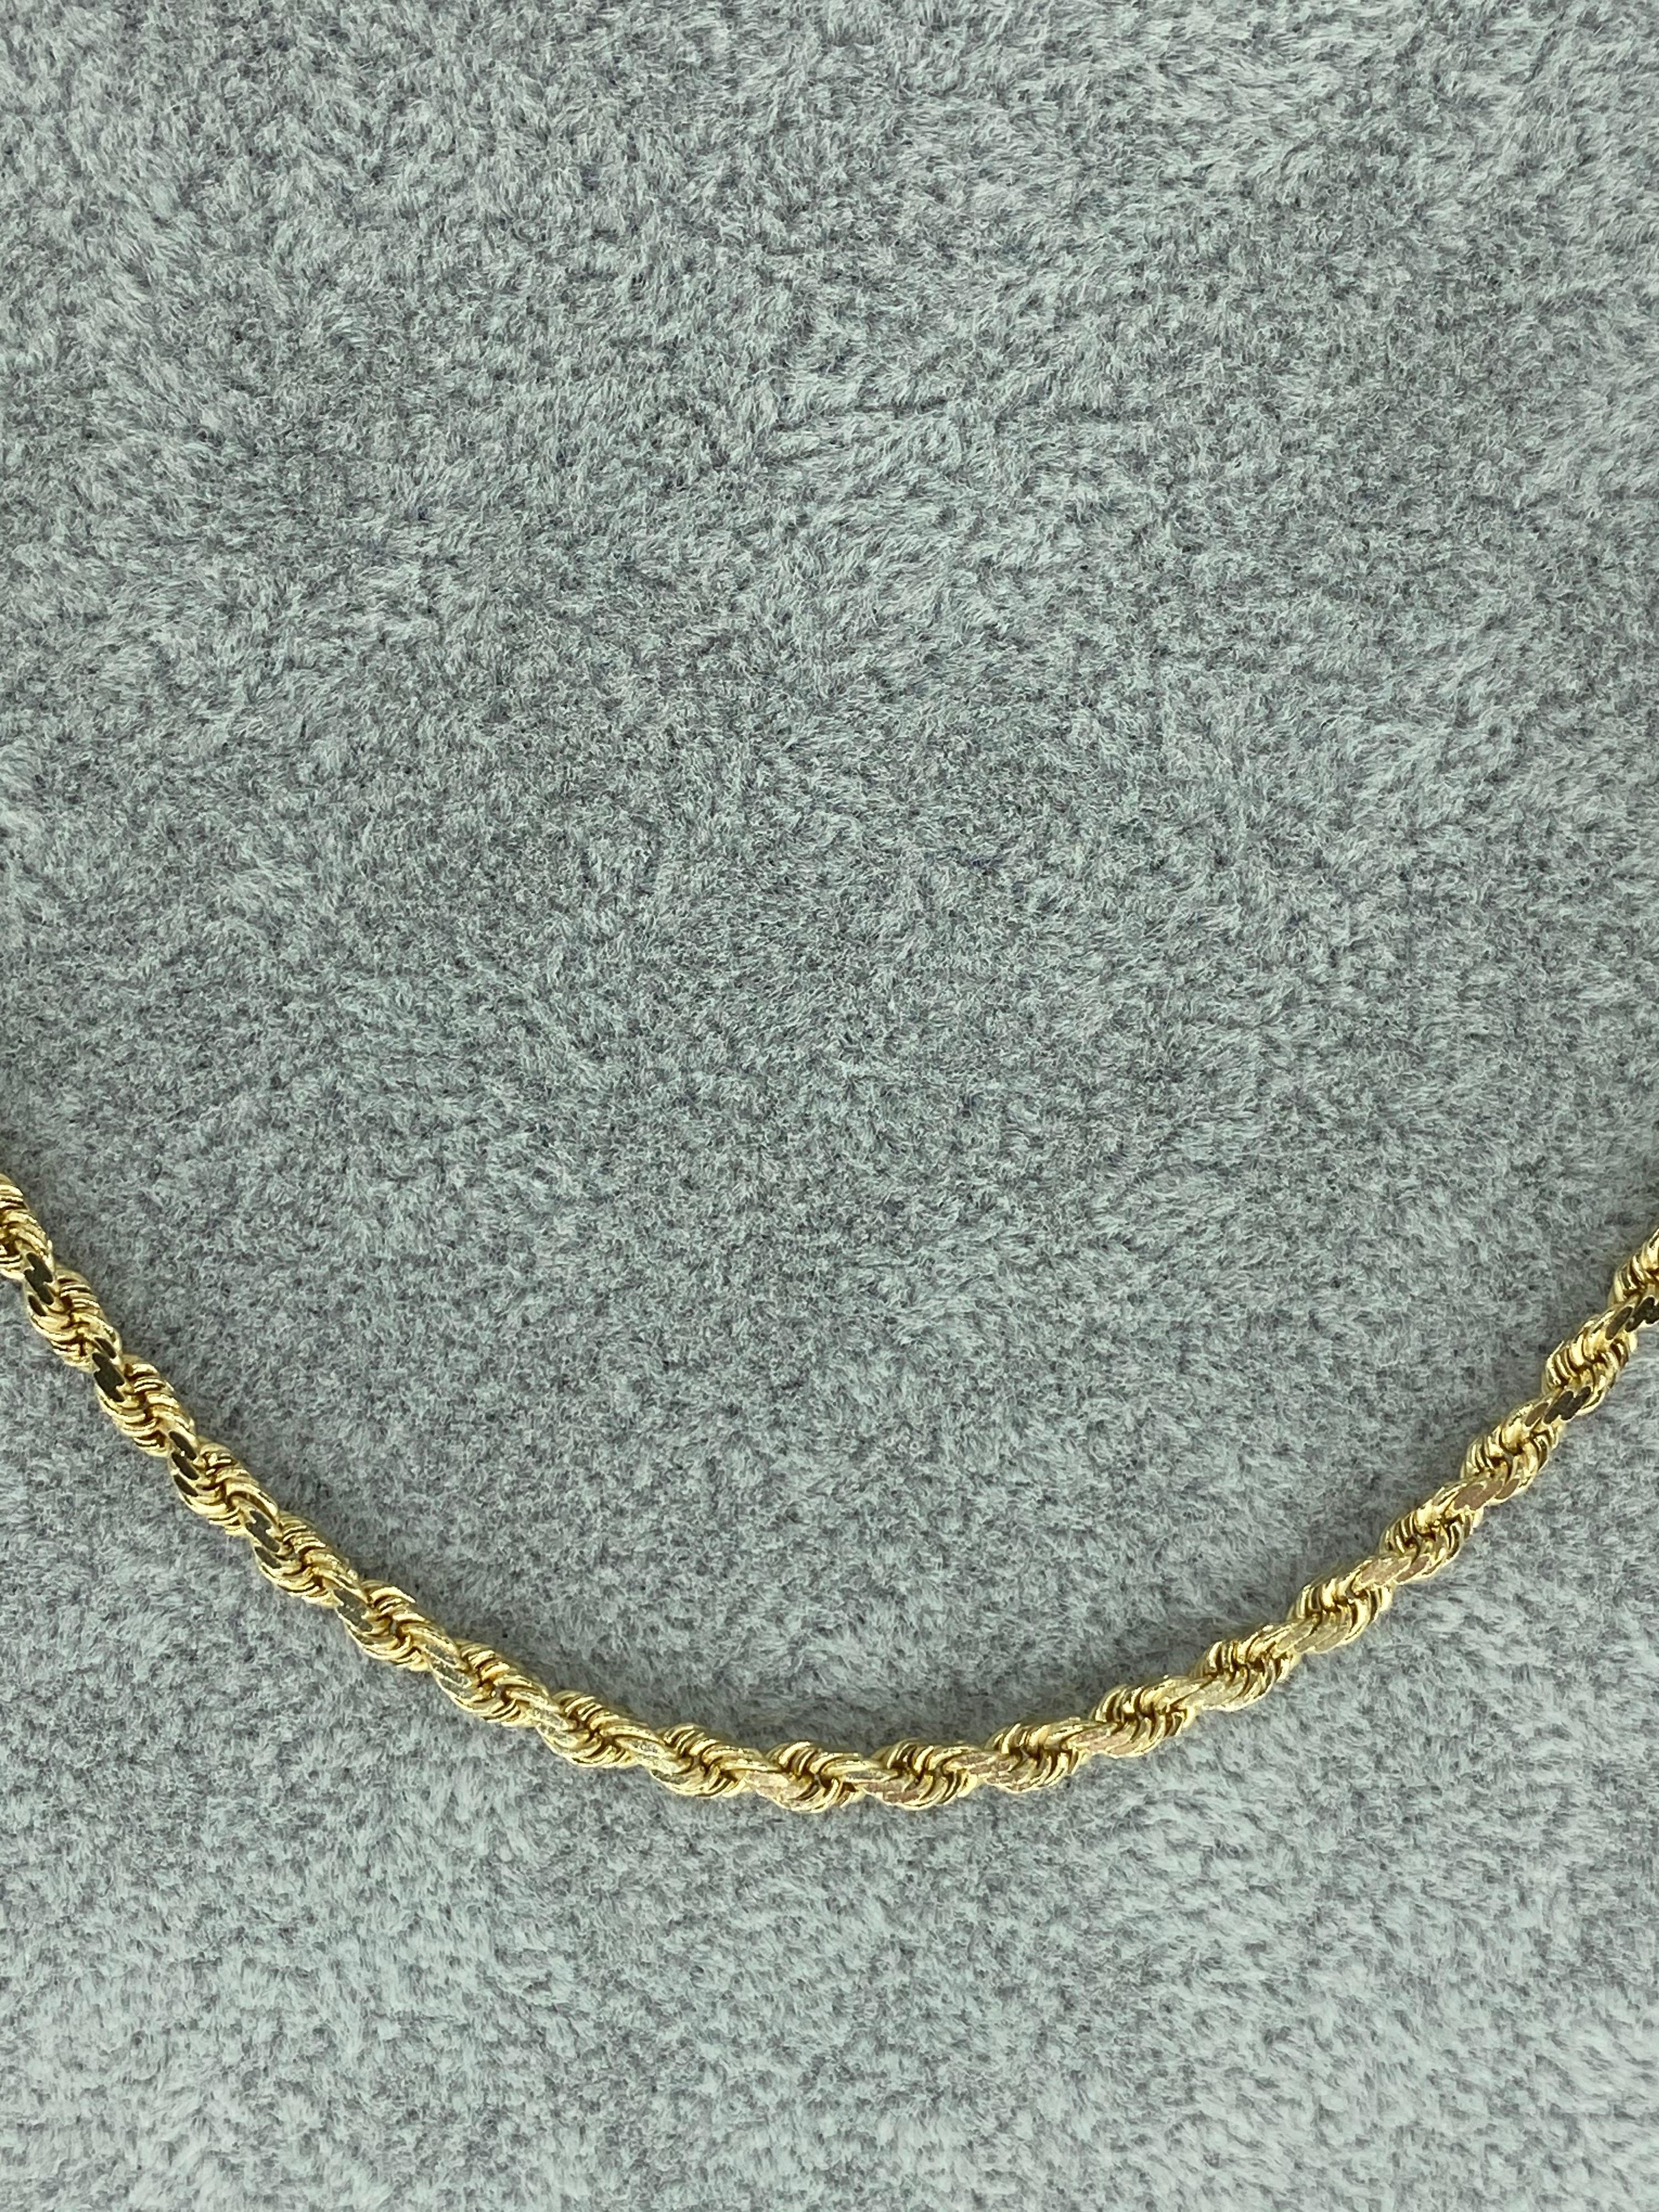 Beautiful and elegant 14k solid twisted rope chain. The necklace is stamped 14k and weights 16.3 grams solid gold 14k. Very shiny and stands out. The thickness is 2.6mm